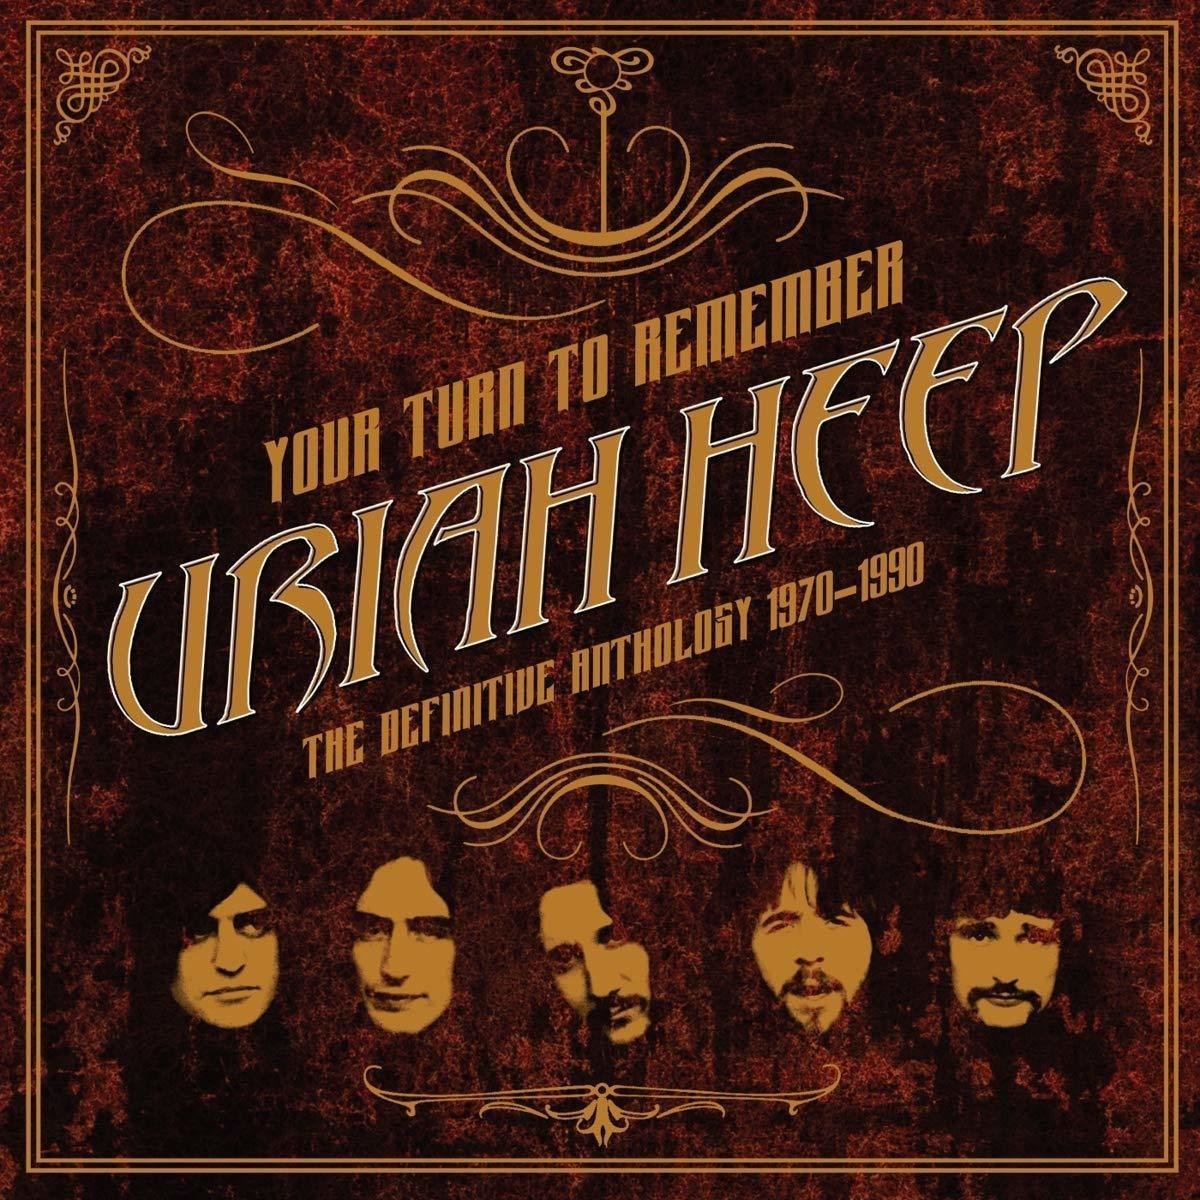 Disco de vinil Uriah Heep - Your Turn To Remember: The Definitive Anthology 1970-1990 (LP)